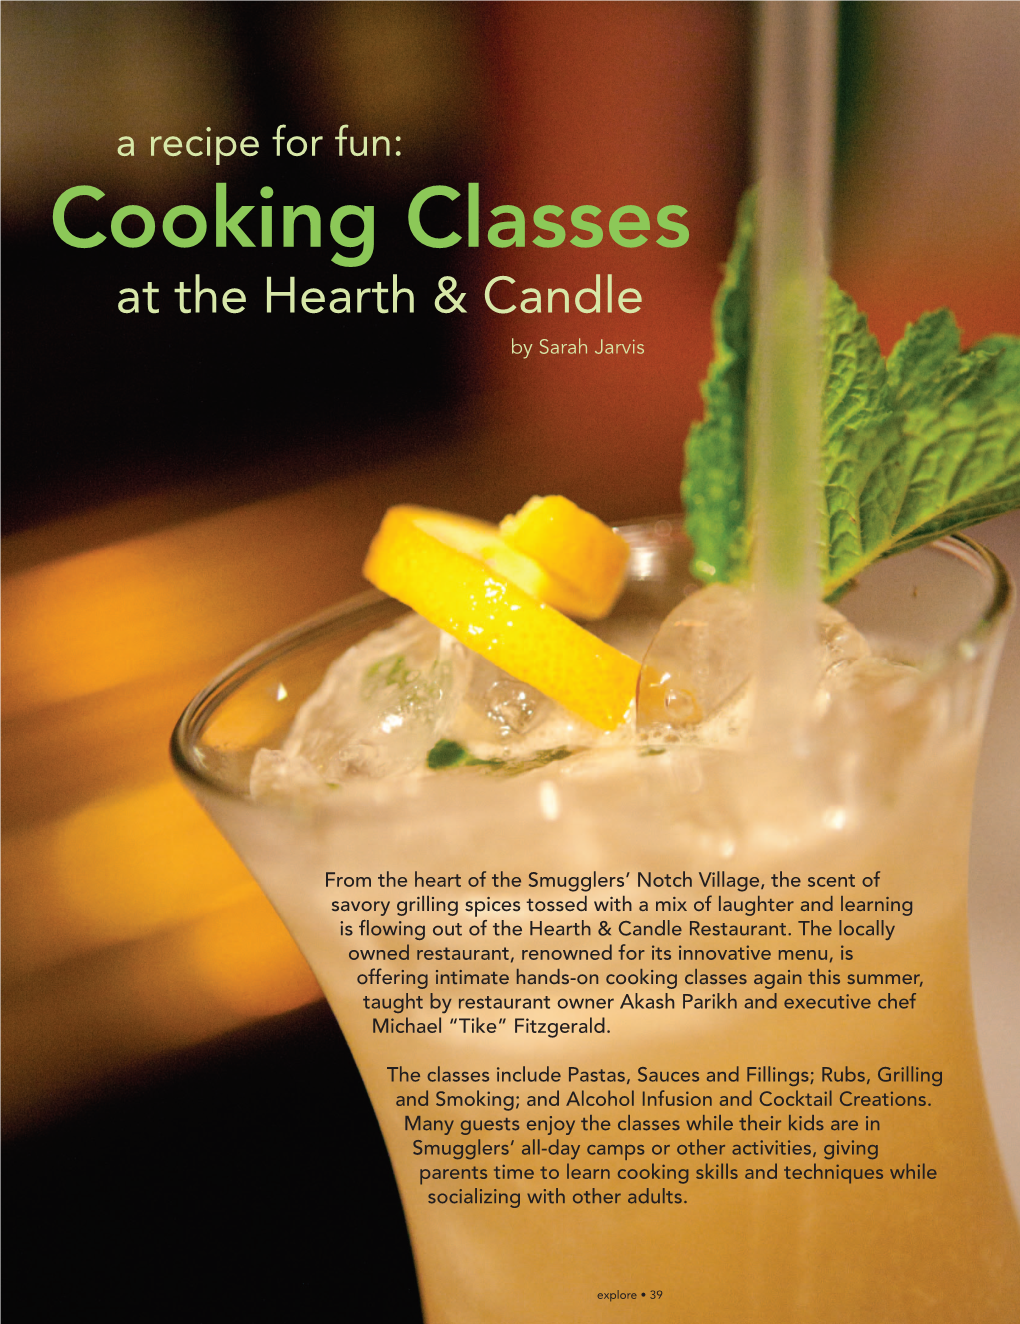 Cooking Classes at the Hearth & Candle by Sarah Jarvis